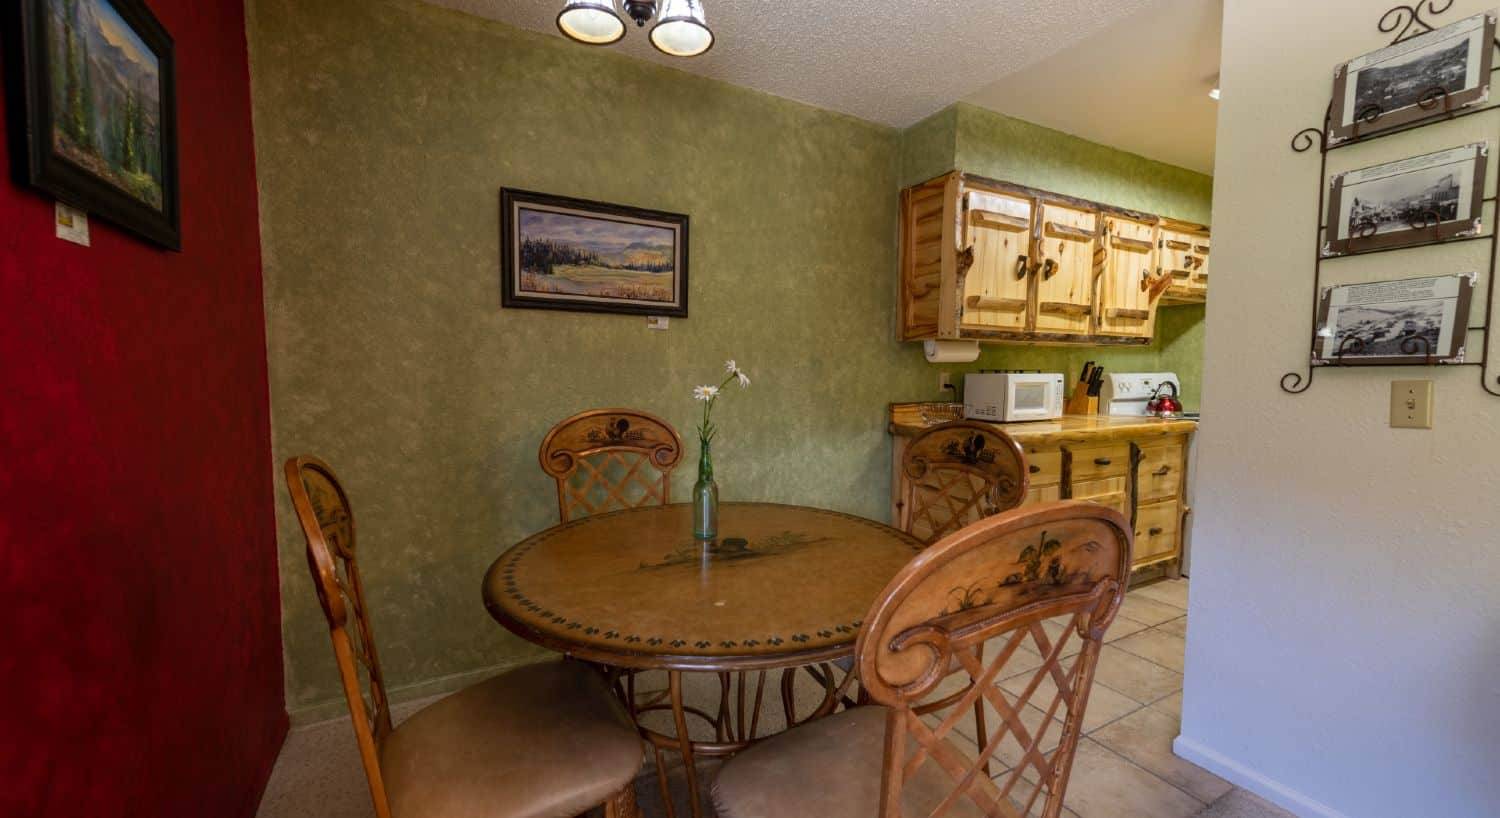 Charming round dining table with four chairs, kitchen to the right with rustic log cabinets.